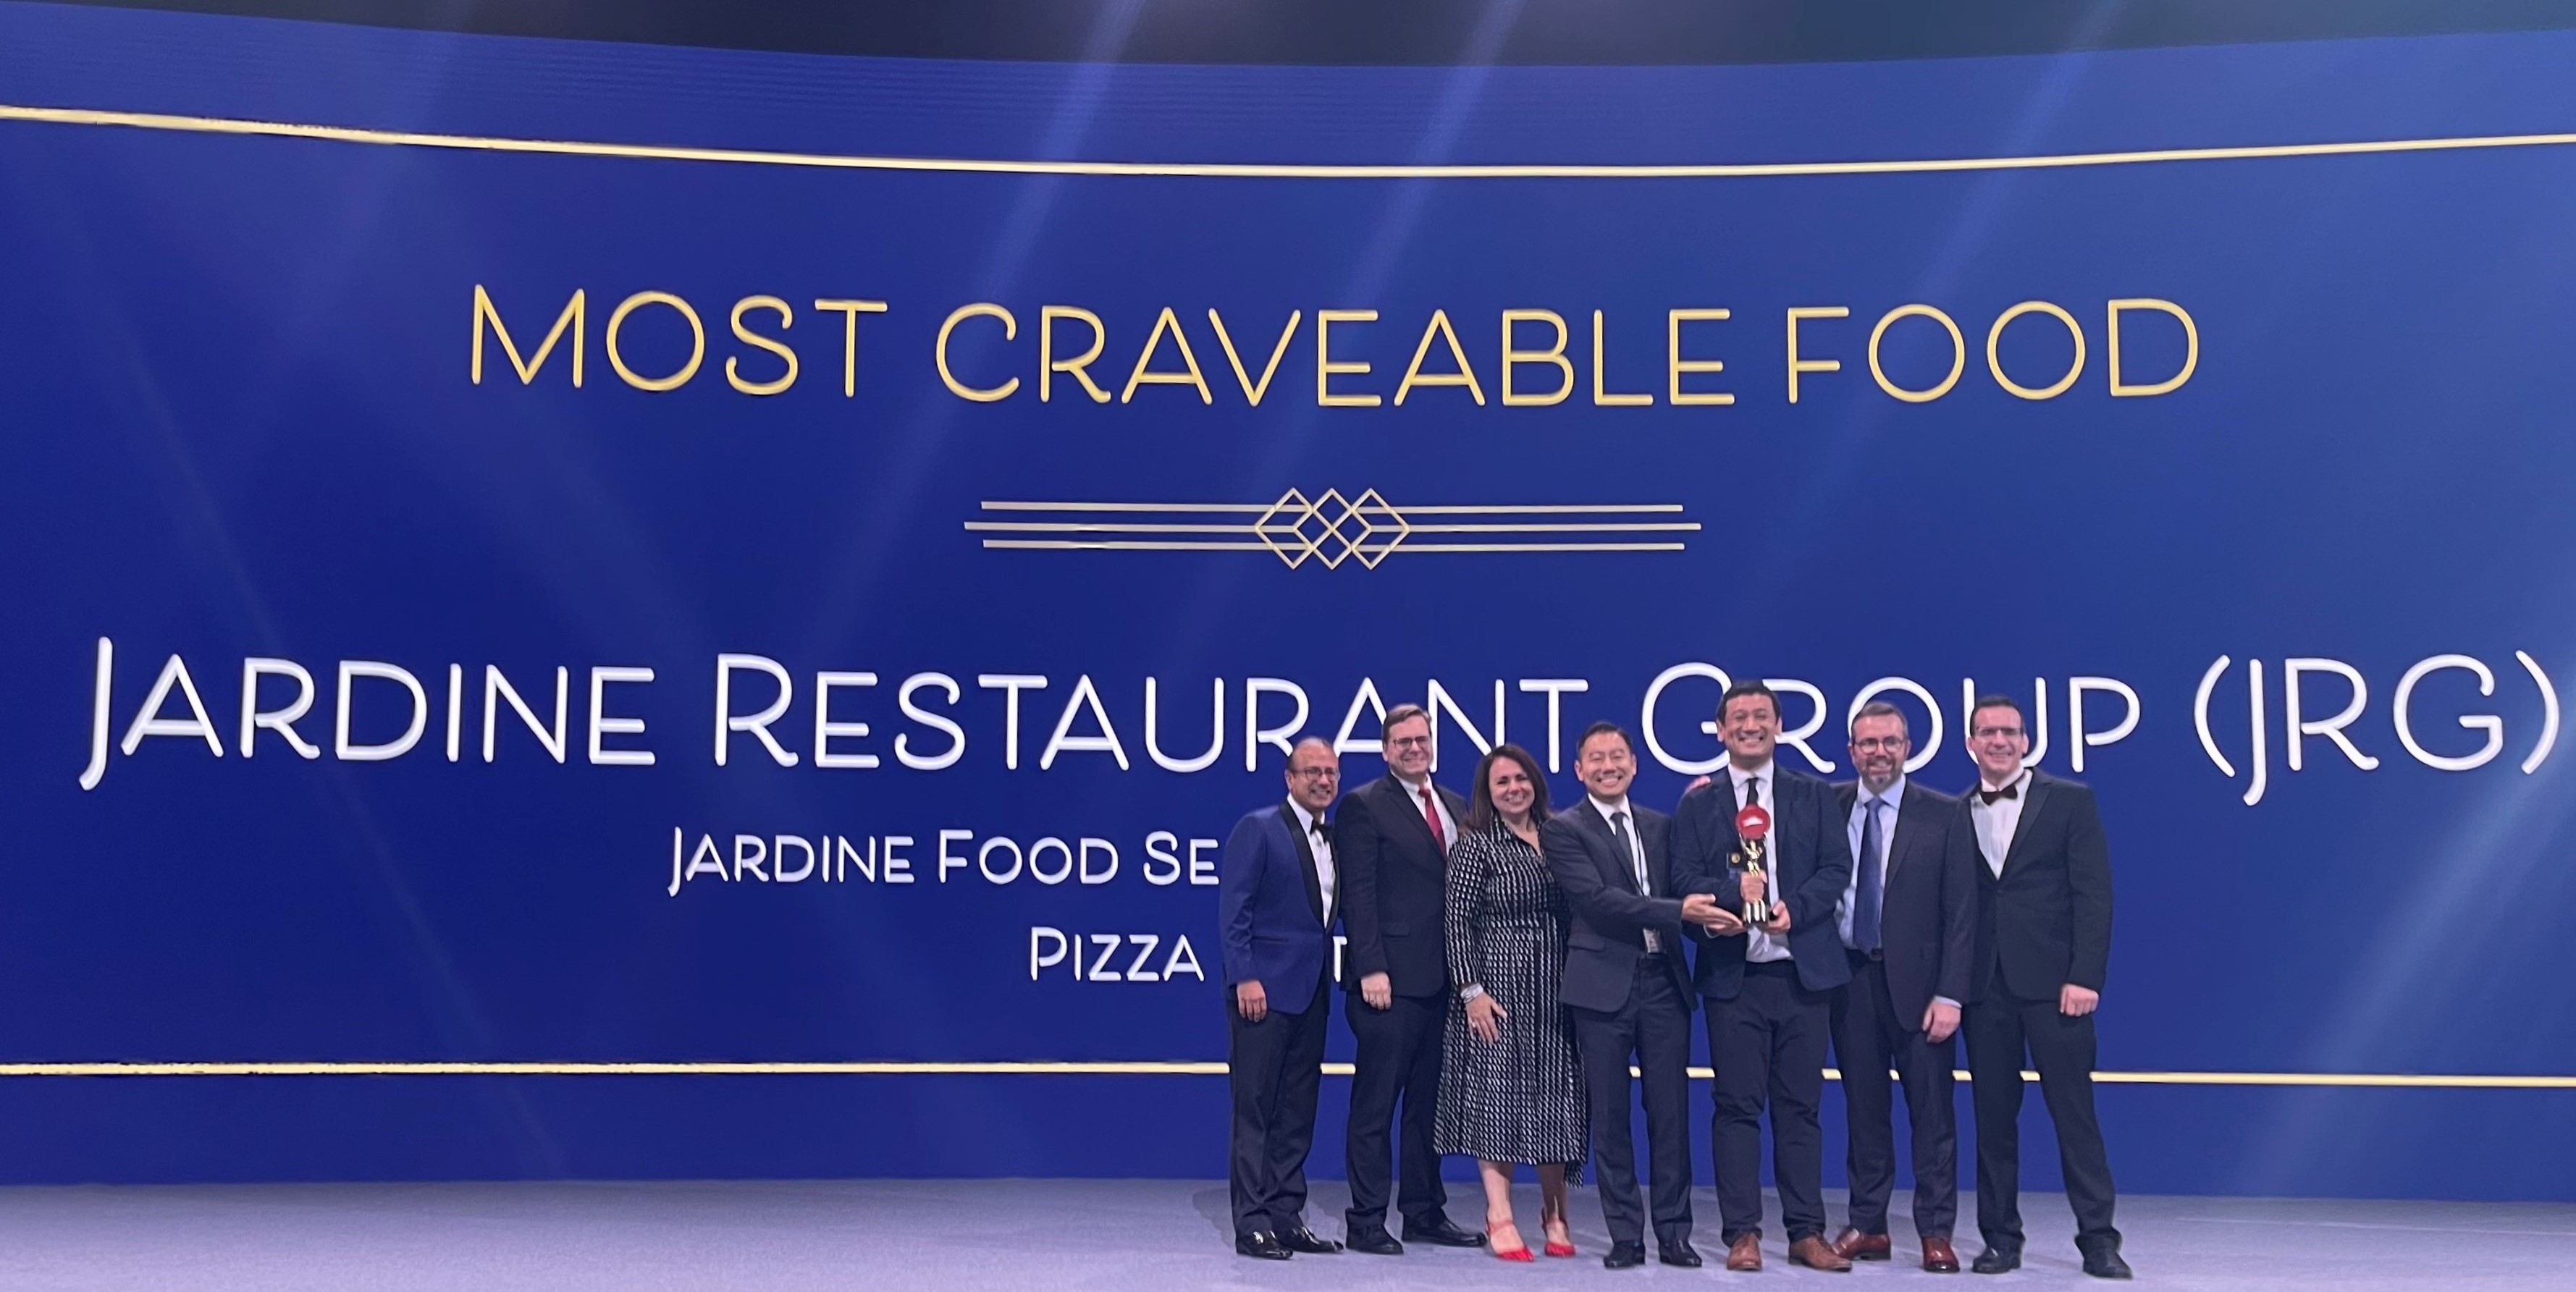 Photo 2 Most Craveable Food Award - Triple Triumph for Jardine Restaurant Group at the Yum! International Franchise Convention 2023